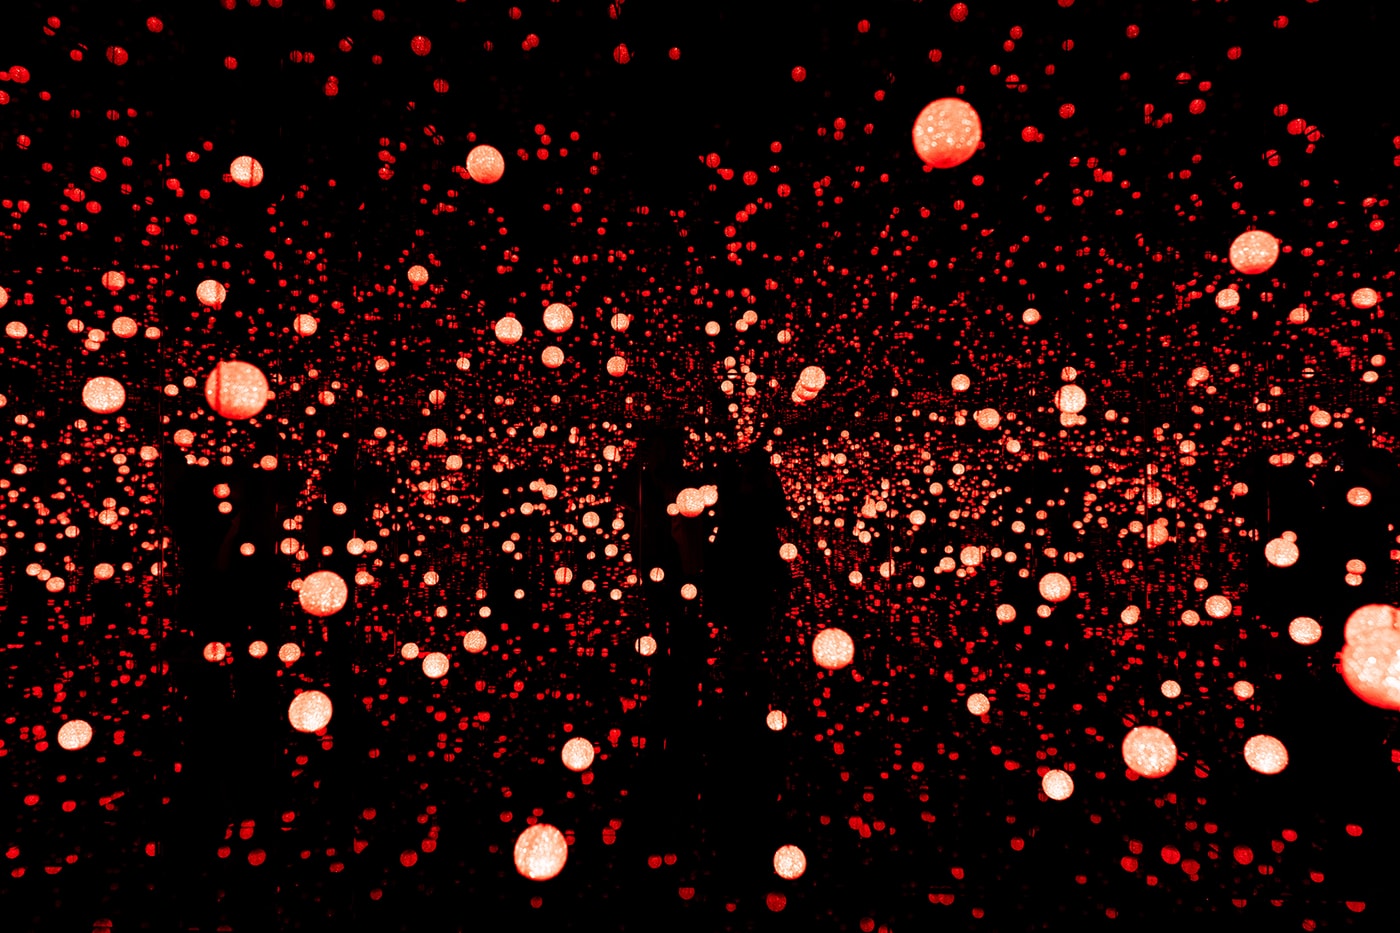 Yayoi Kusama "EVERY DAY I PRAY FOR LOVE" 'DANCING LIGHTS THAT FLEW UP TO THE UNIVERSE'